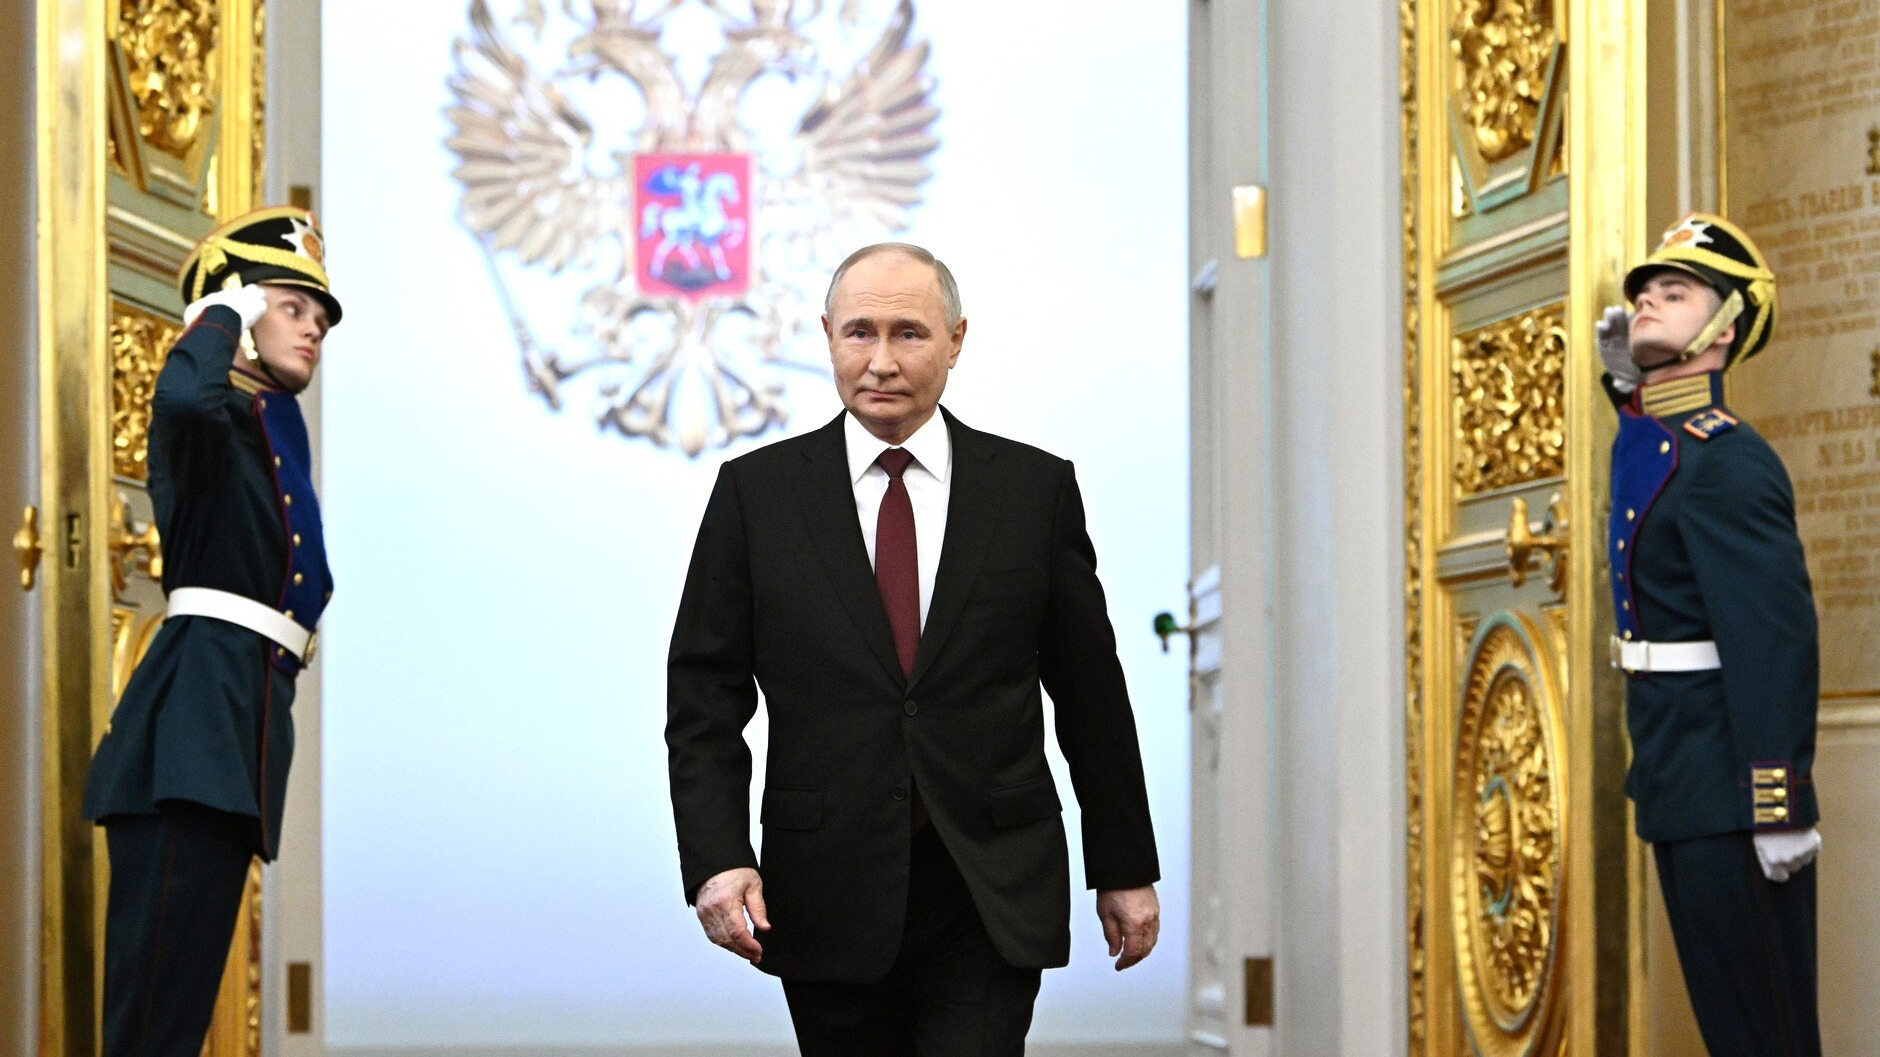 Putin sworn in for a fifth term.  "The illusion of legality for an almost lifelong stay in power"